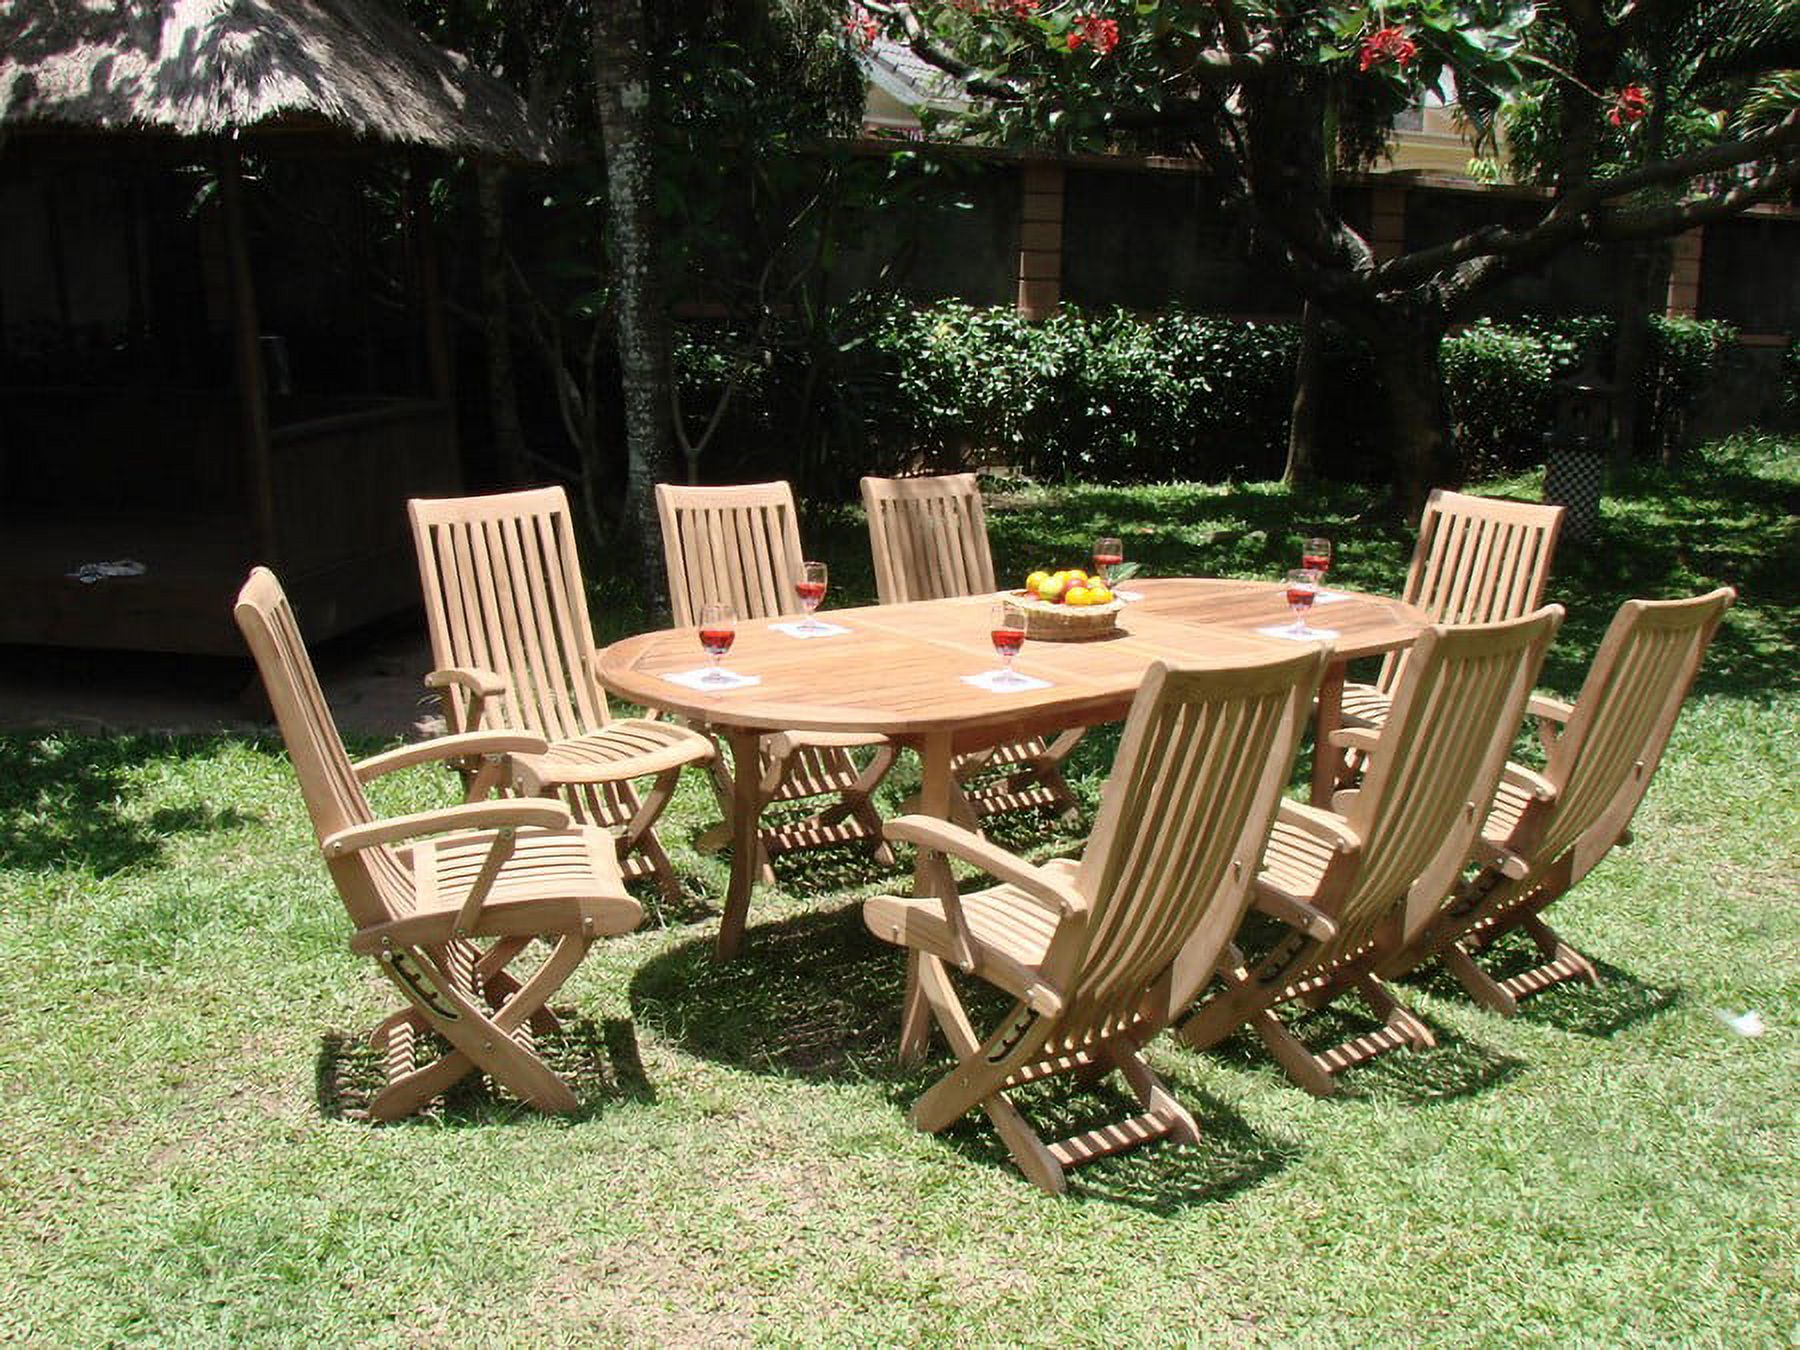 Teak Dining Set:6 Seater 7 Pc - 94" Oval Table And 6 Multi Position Folding Reclining Warwick Arm Chairs Outdoor Patio Grade-A Teak Wood WholesaleTeak #WMDSWR4 - image 4 of 4